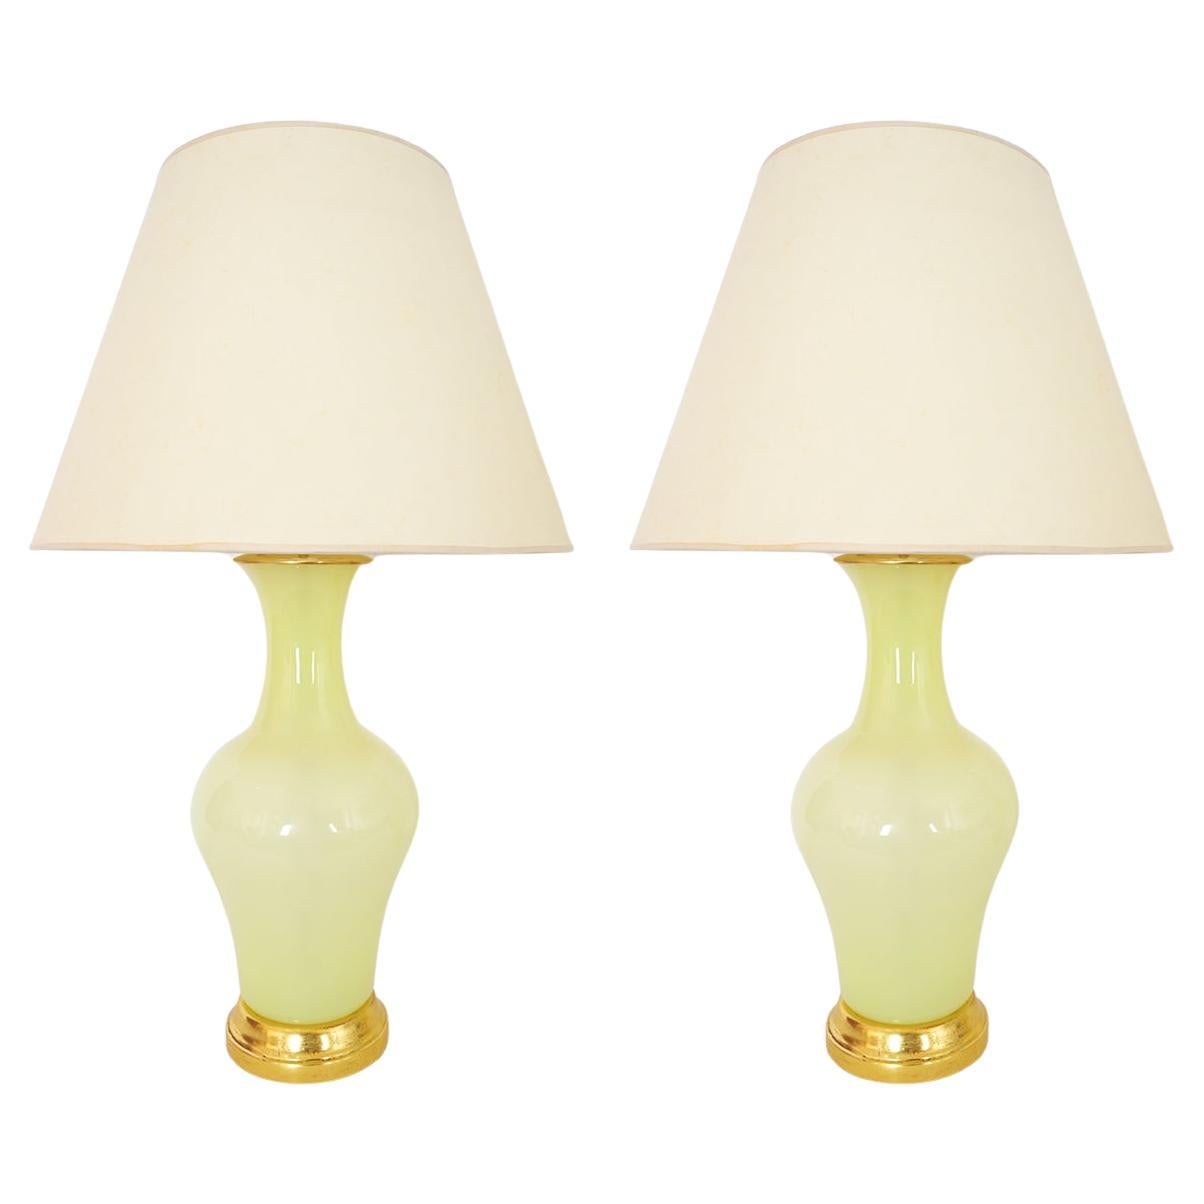 Pair of Pale Citrine Murano Glass Table Lamps by David Duncan Studio